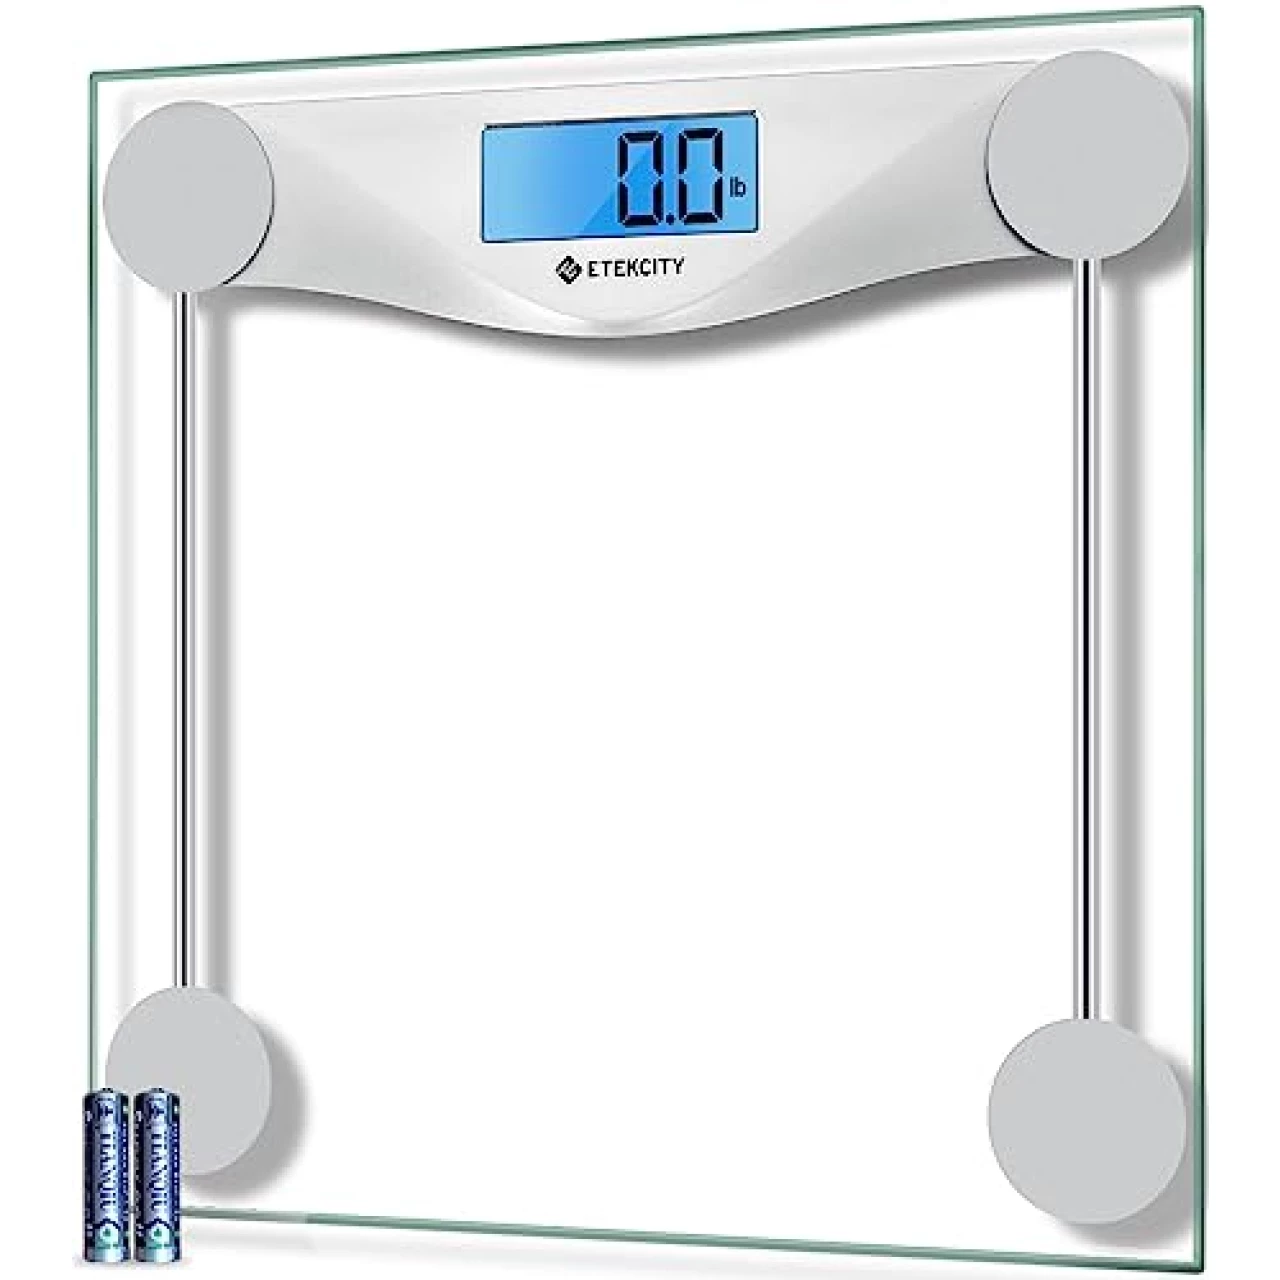 Etekcity Bathroom Scale for Body Weight, Digital Weighing Machine for People, Accurate &amp; Large LCD Backlight Display, 6mm Tempered Glass,